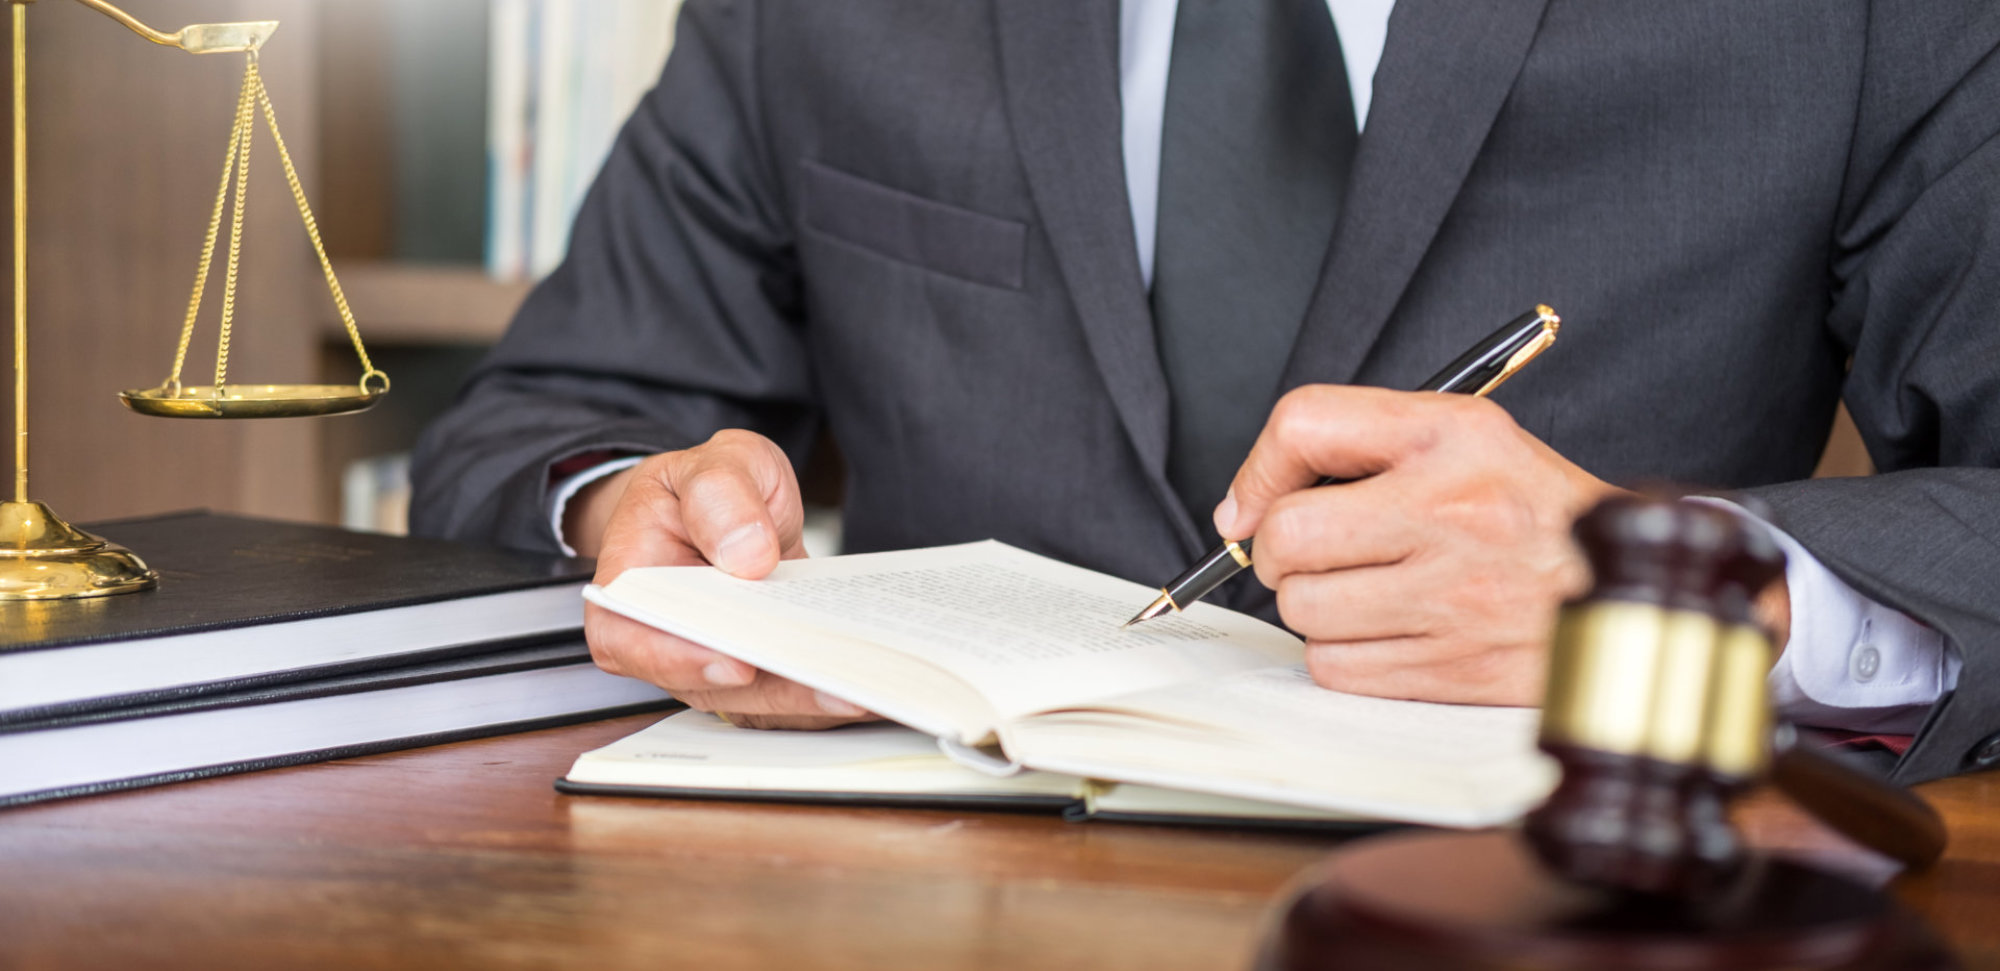 Attorney writing on a document